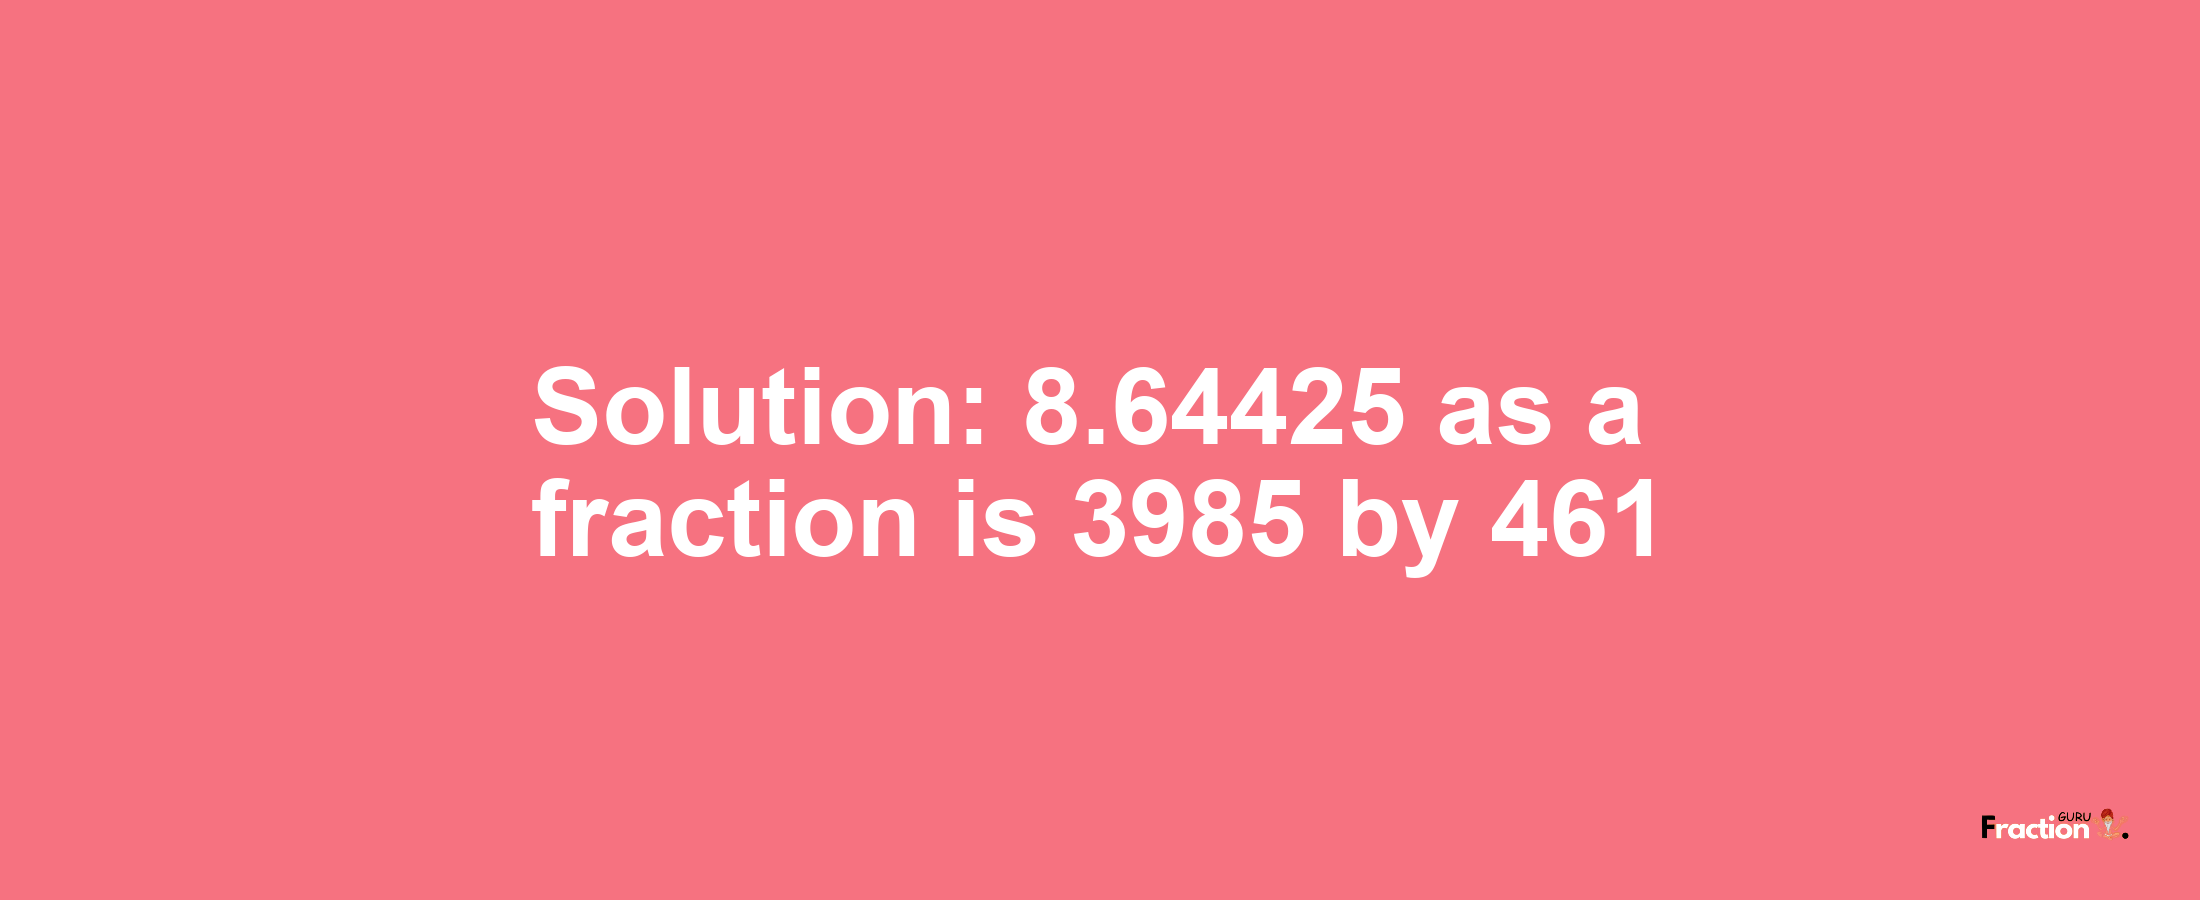 Solution:8.64425 as a fraction is 3985/461